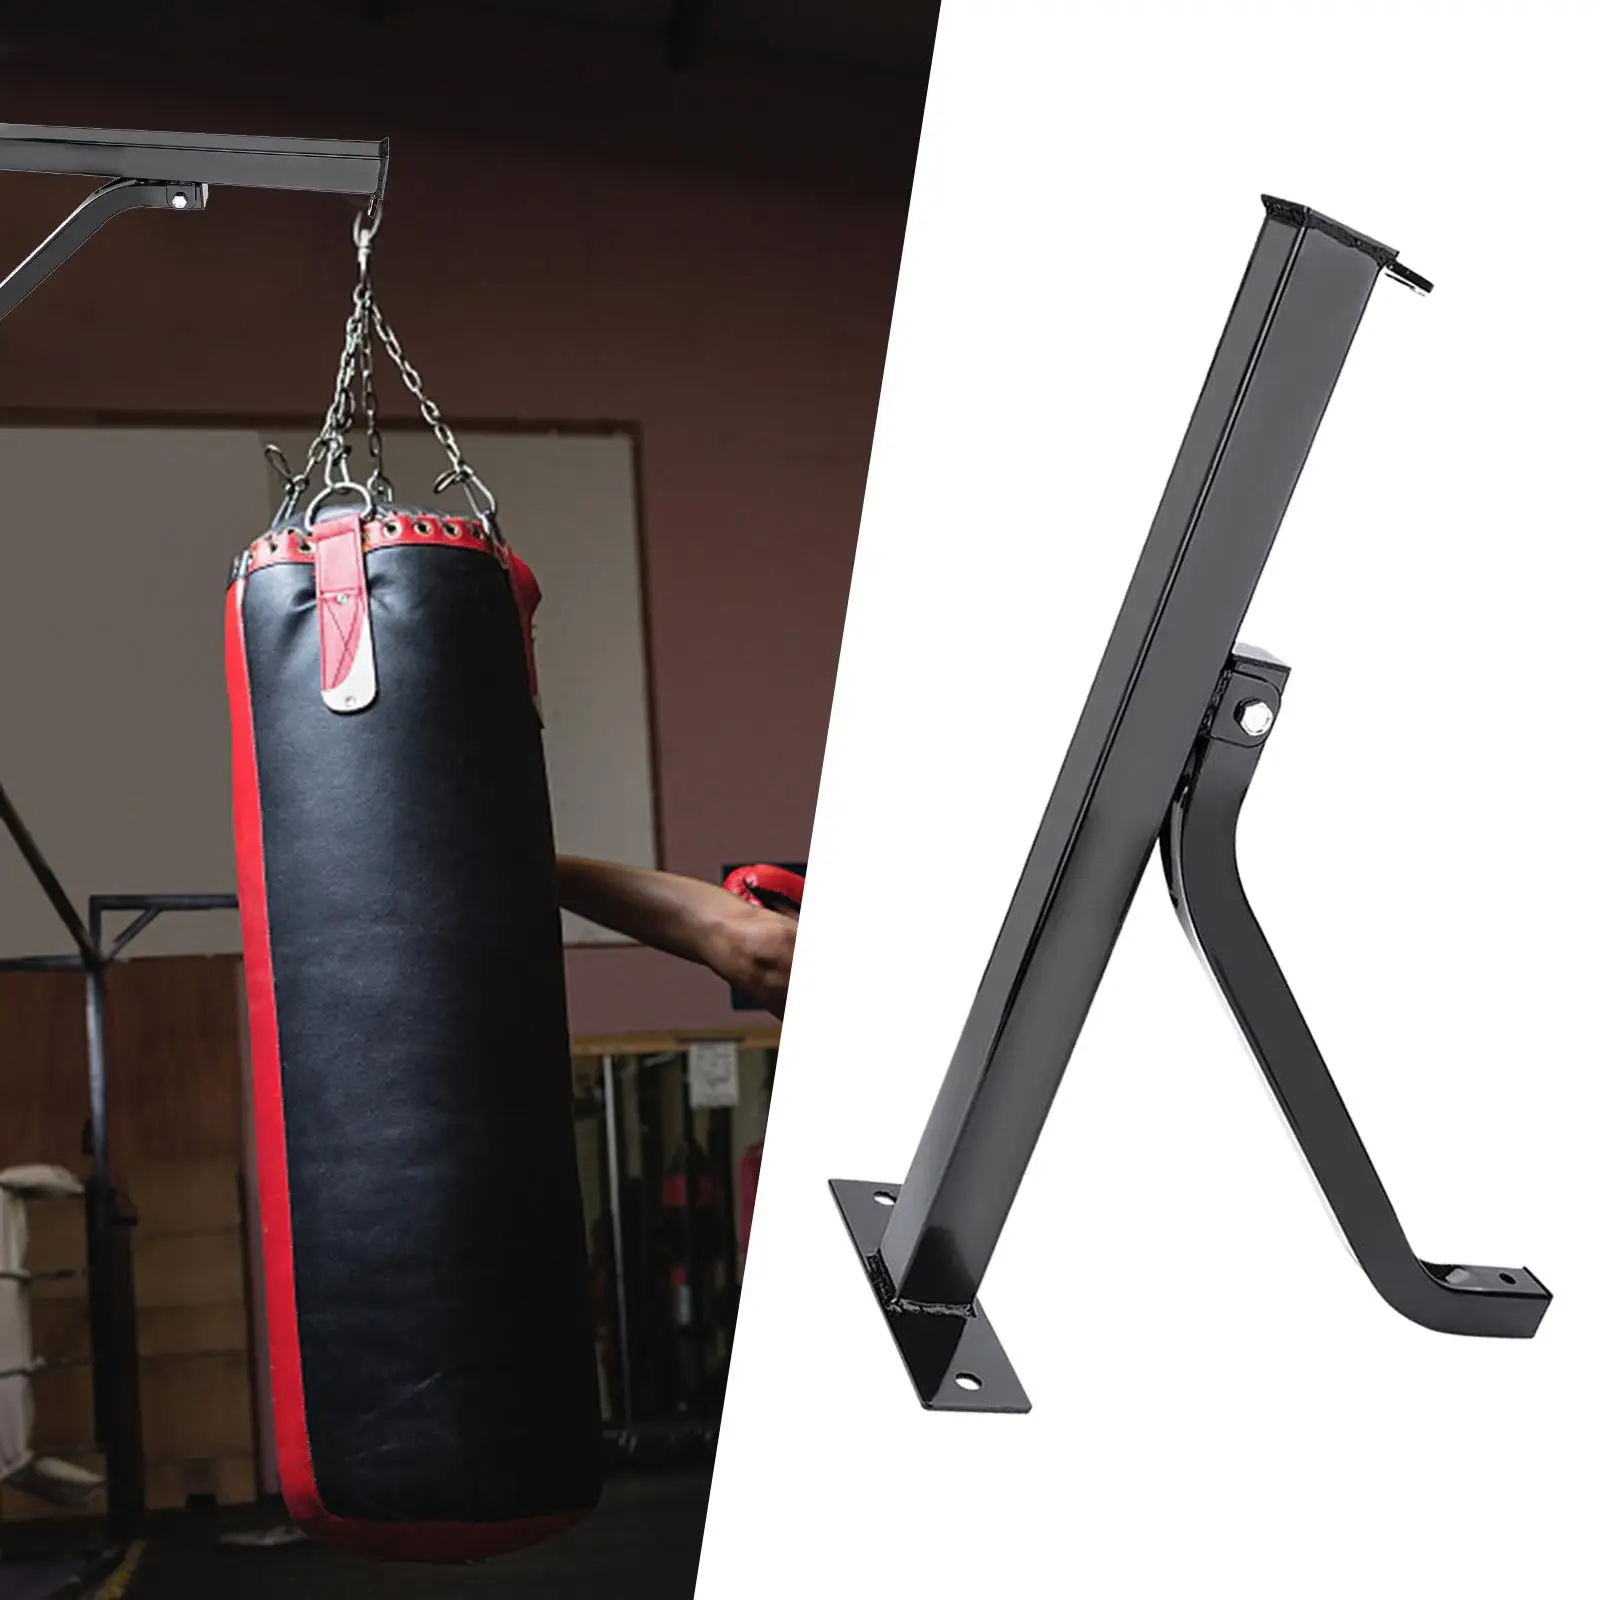 Wall Mount Heavy Bag Hanger Punching Bag Bracket Boxing Bag Stand Holder Training Hanging for Fitness Home Muay Thai Accessories